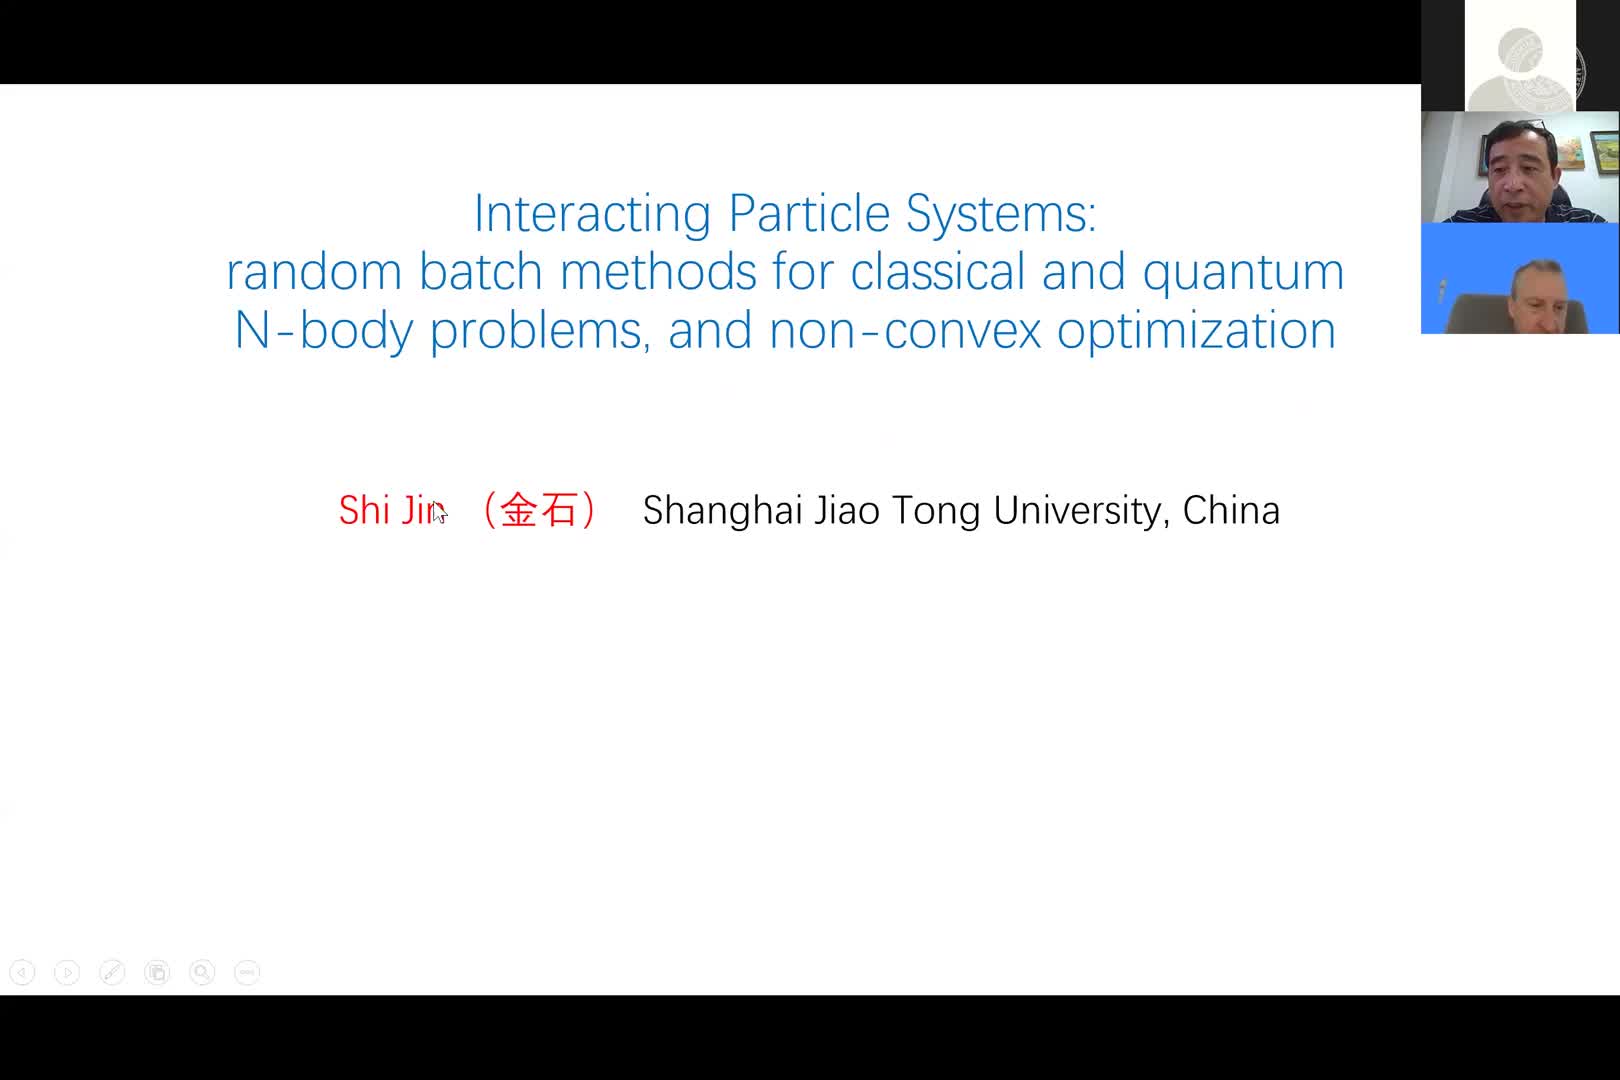 Interacting Particle Systems: Fast algorithms and non-convex optimization (Shi Jin, Shanghai Jiao Tong University) preview image